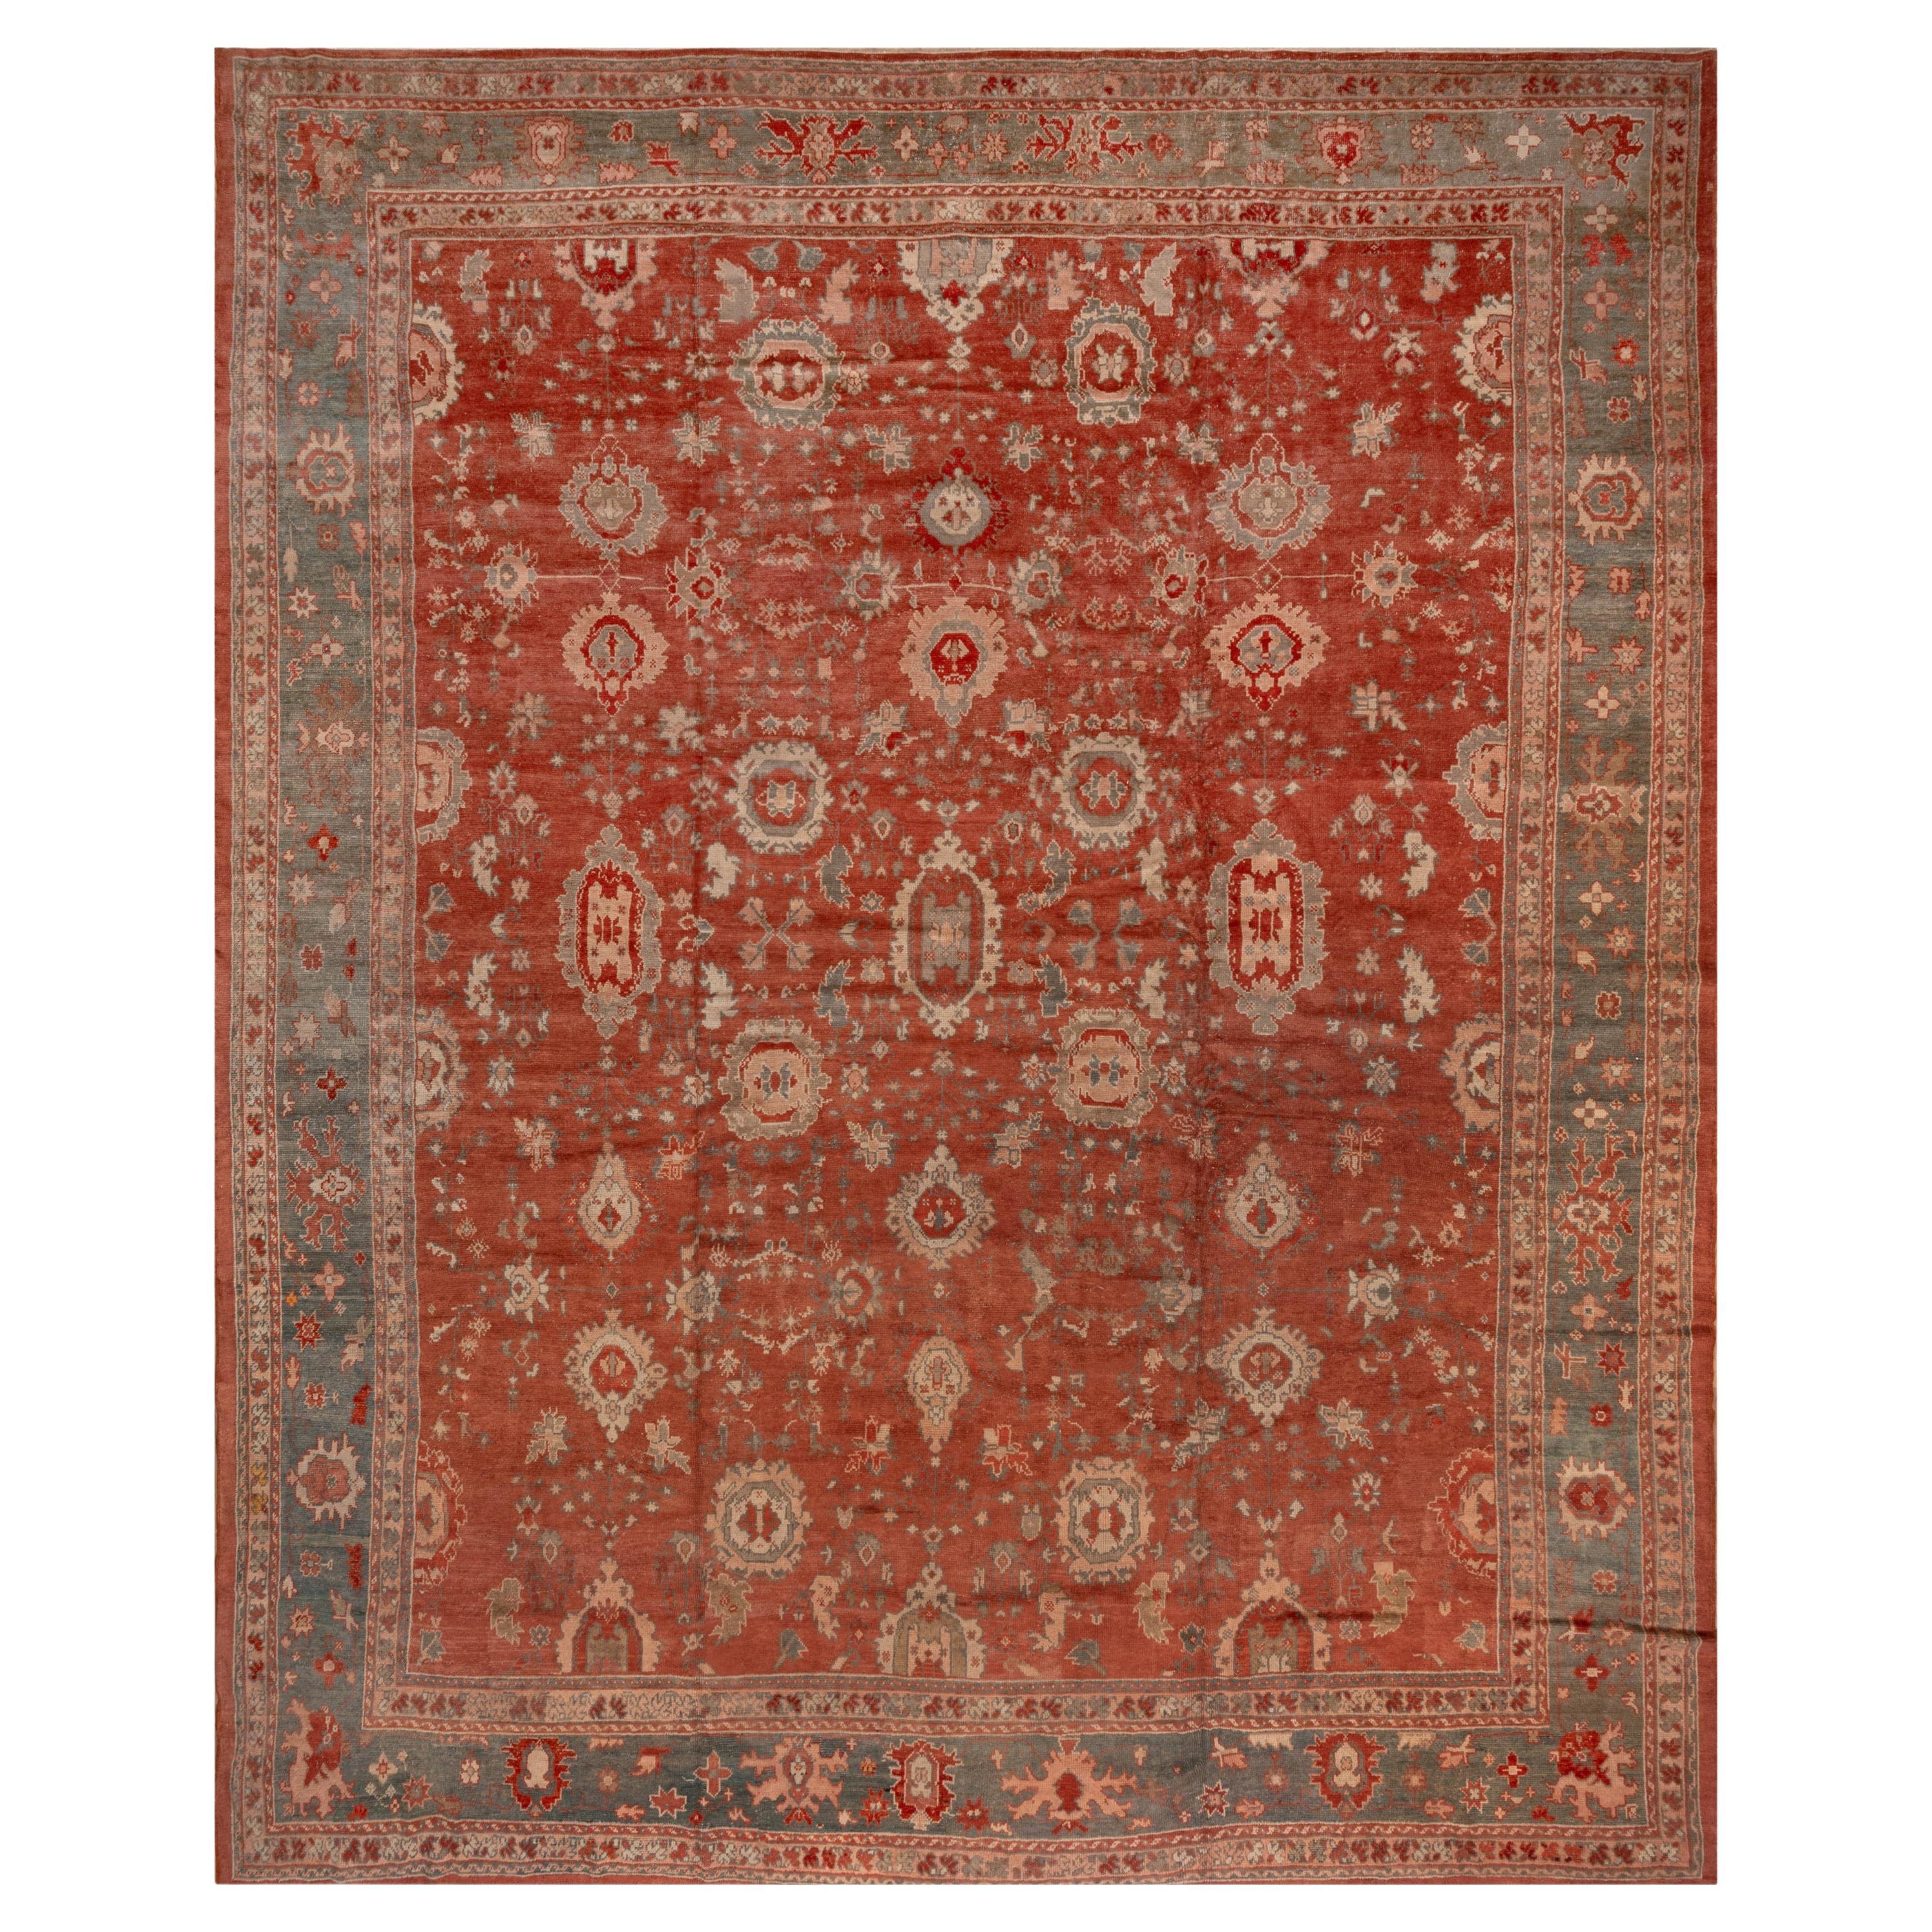 1900s Rare Antique Turkish Oushak Carpet, Rusty Red Allover Field, Green Borders For Sale